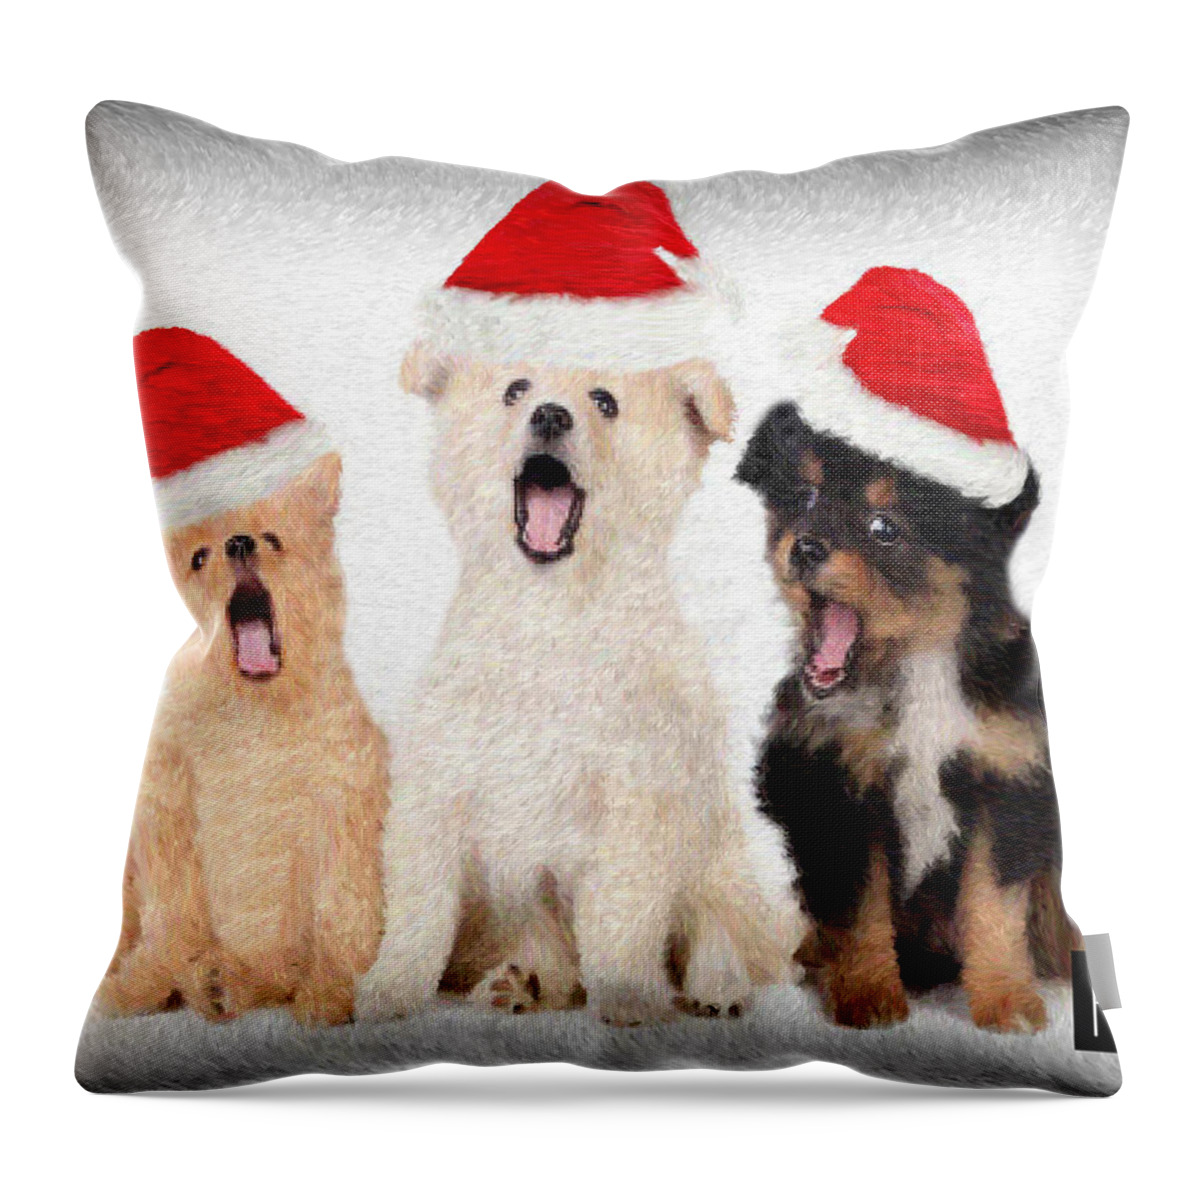 Christmas Throw Pillow featuring the painting Puppy Christmas Choir by Rafael Salazar